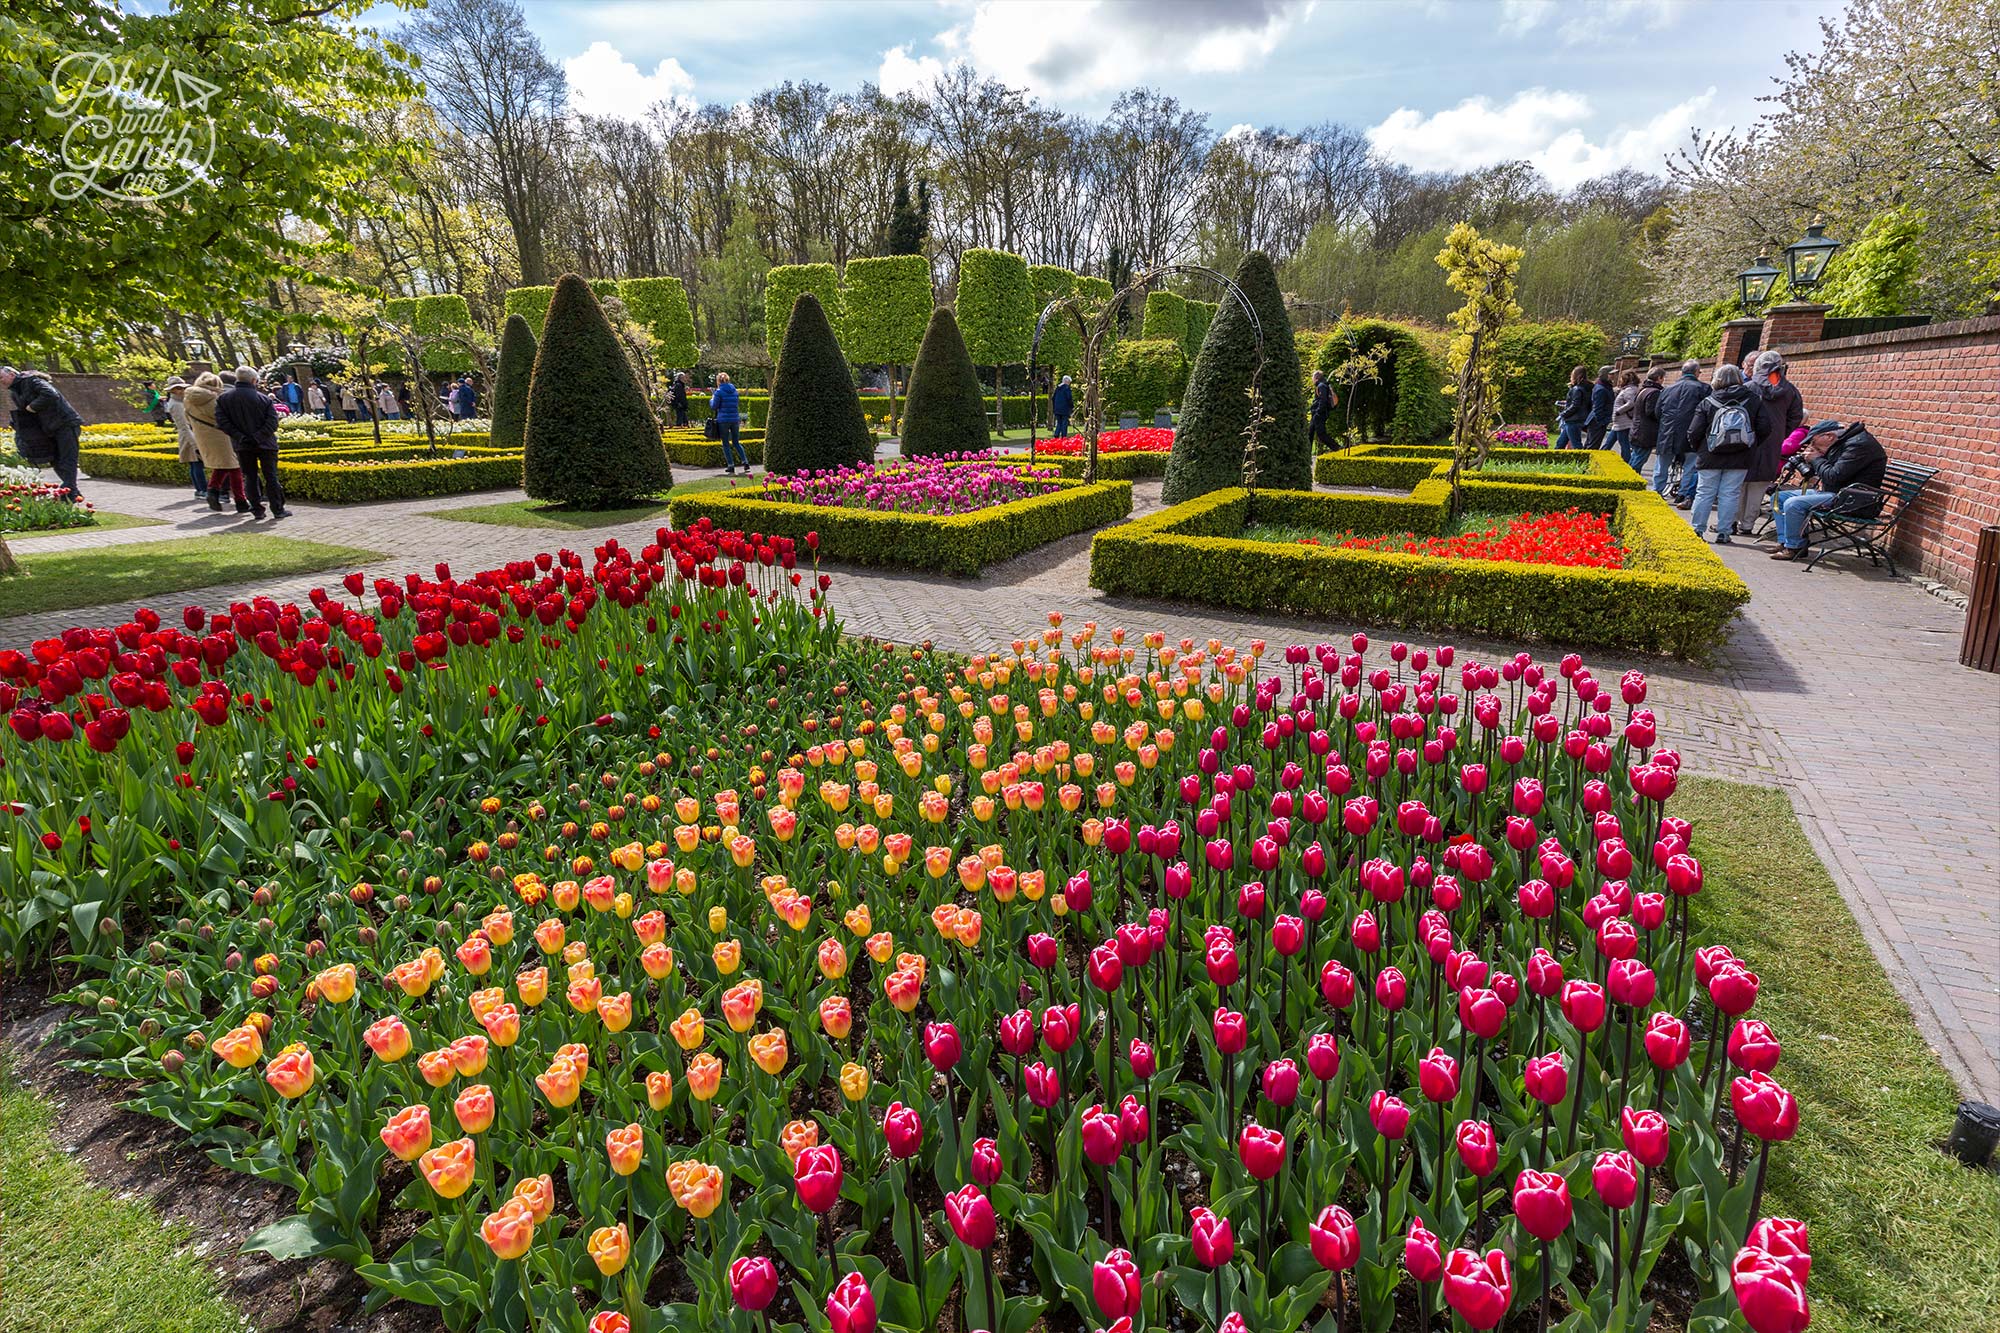 The Historical Garden with varieties of tulips from the 17th and 18th century